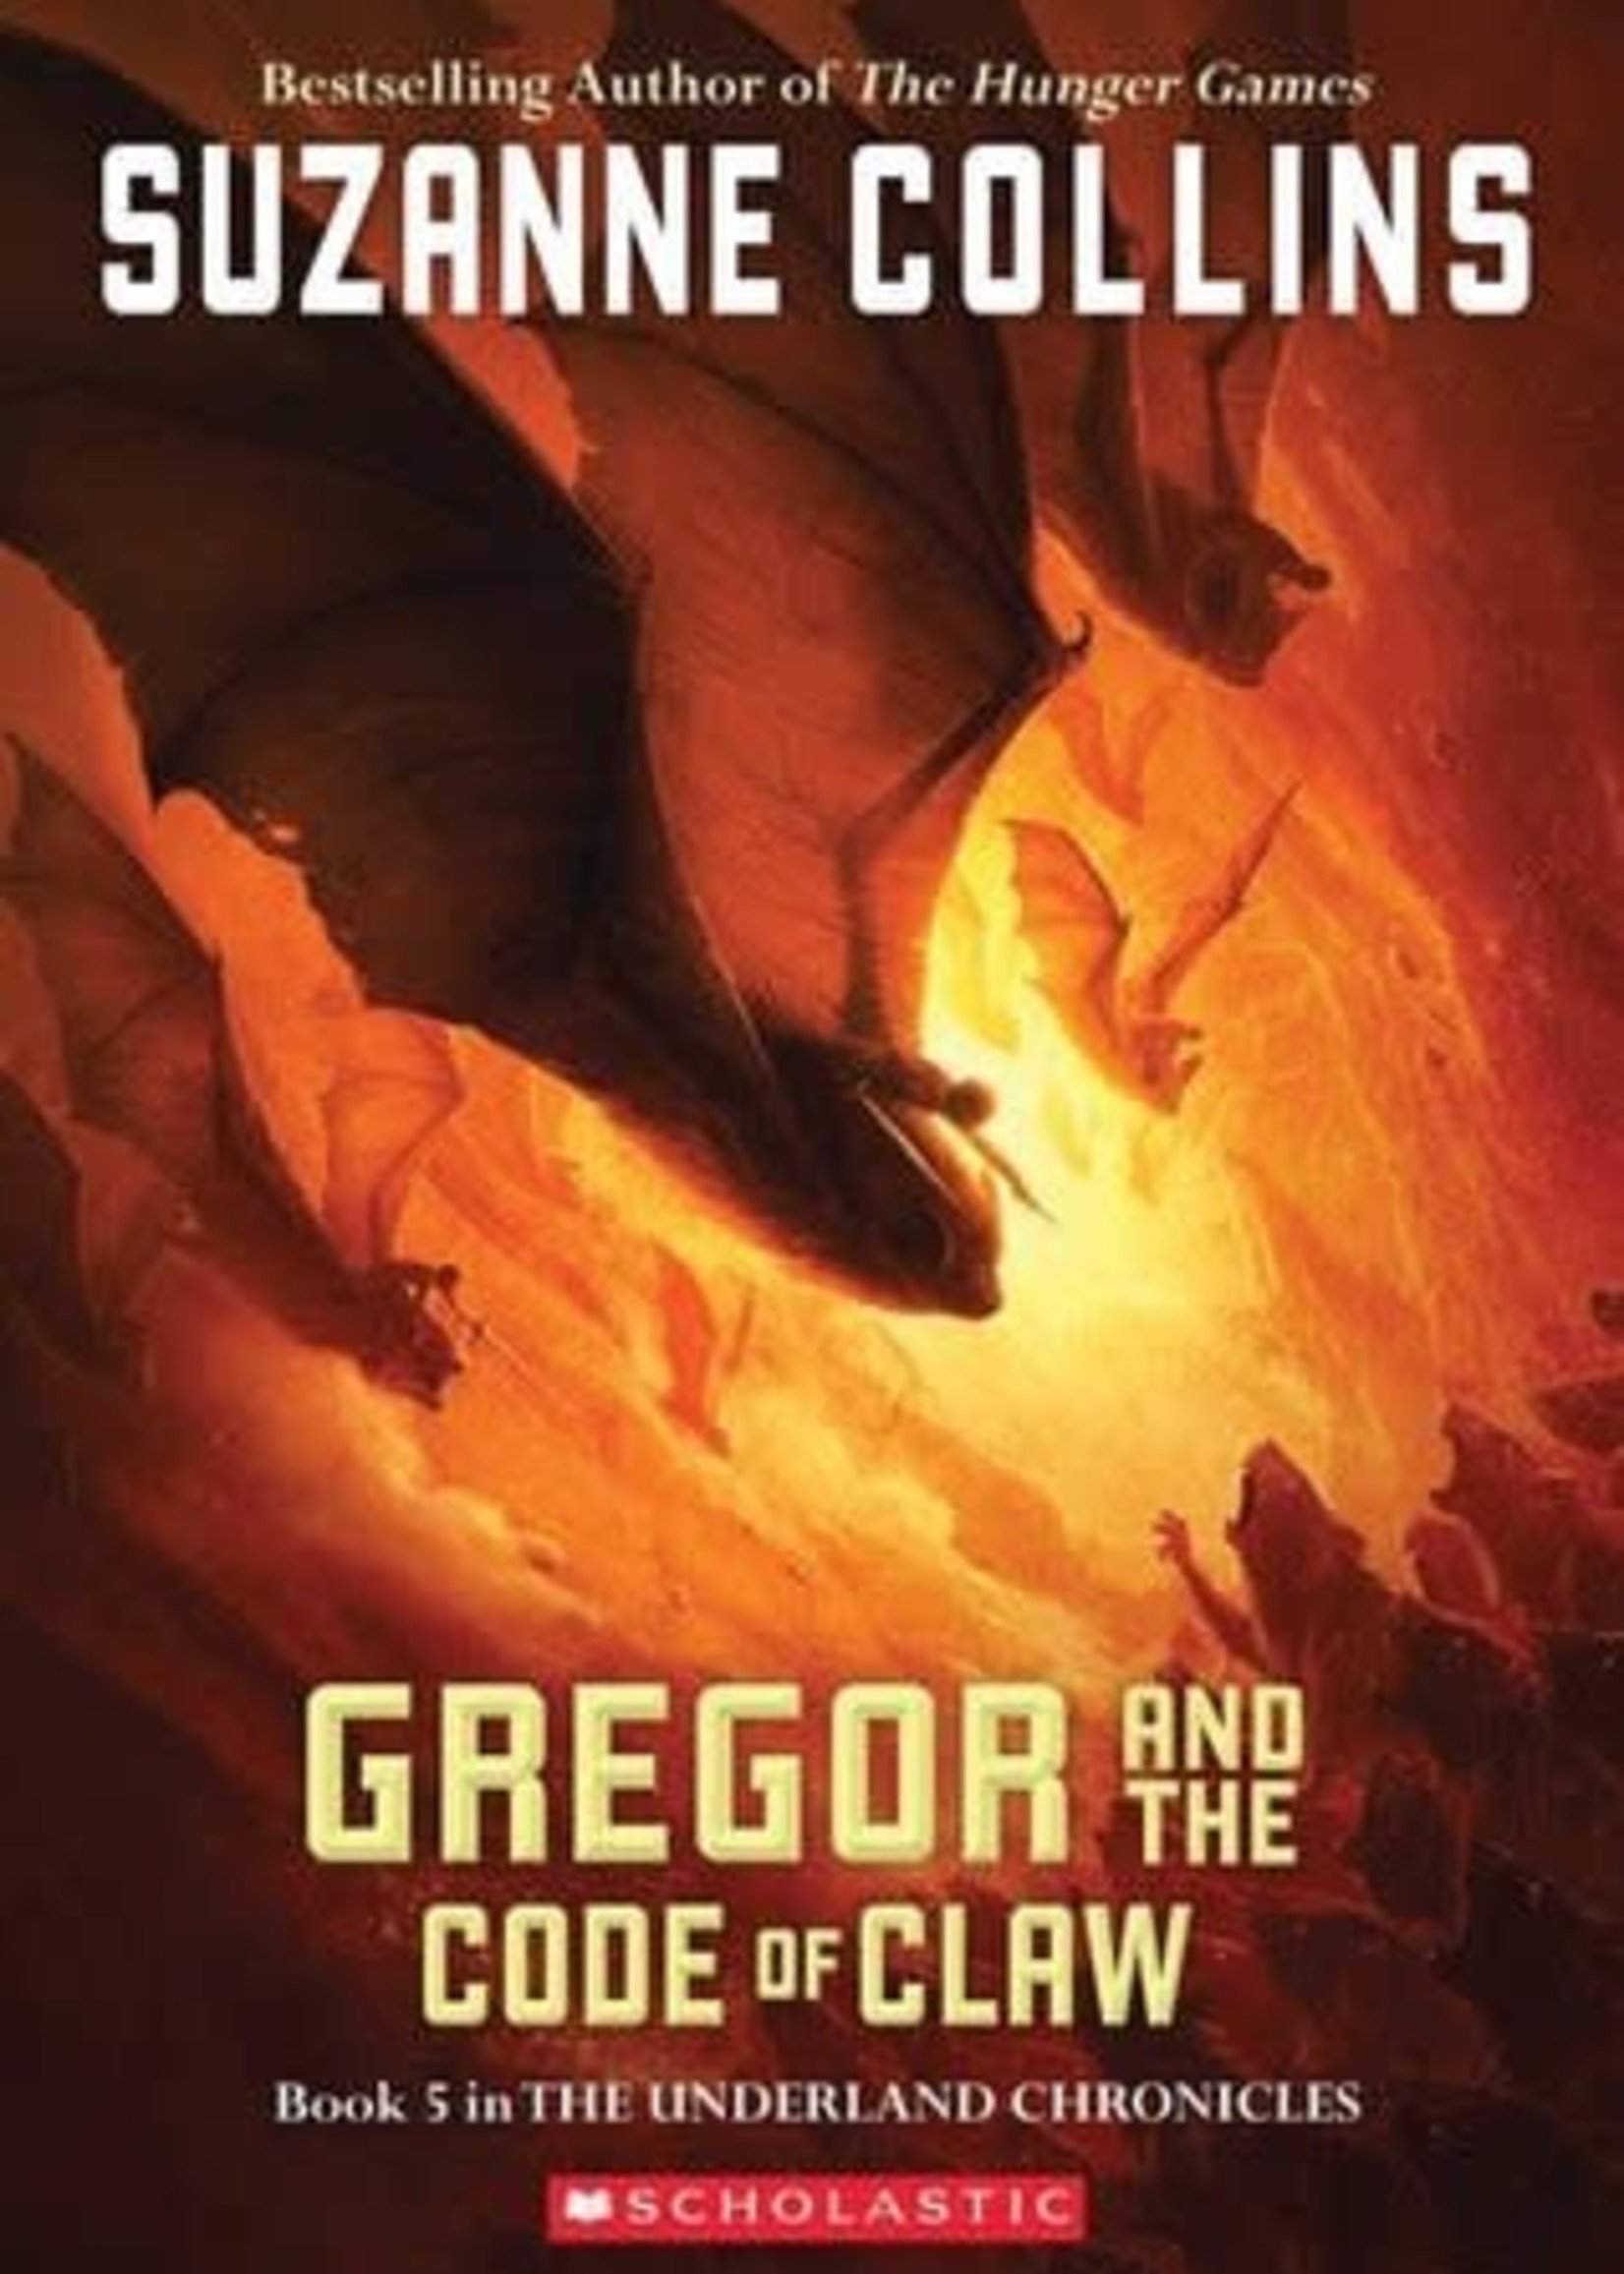 Gregor and the Code of Claw (Underland Chronicles #5) by Suzanne Collins